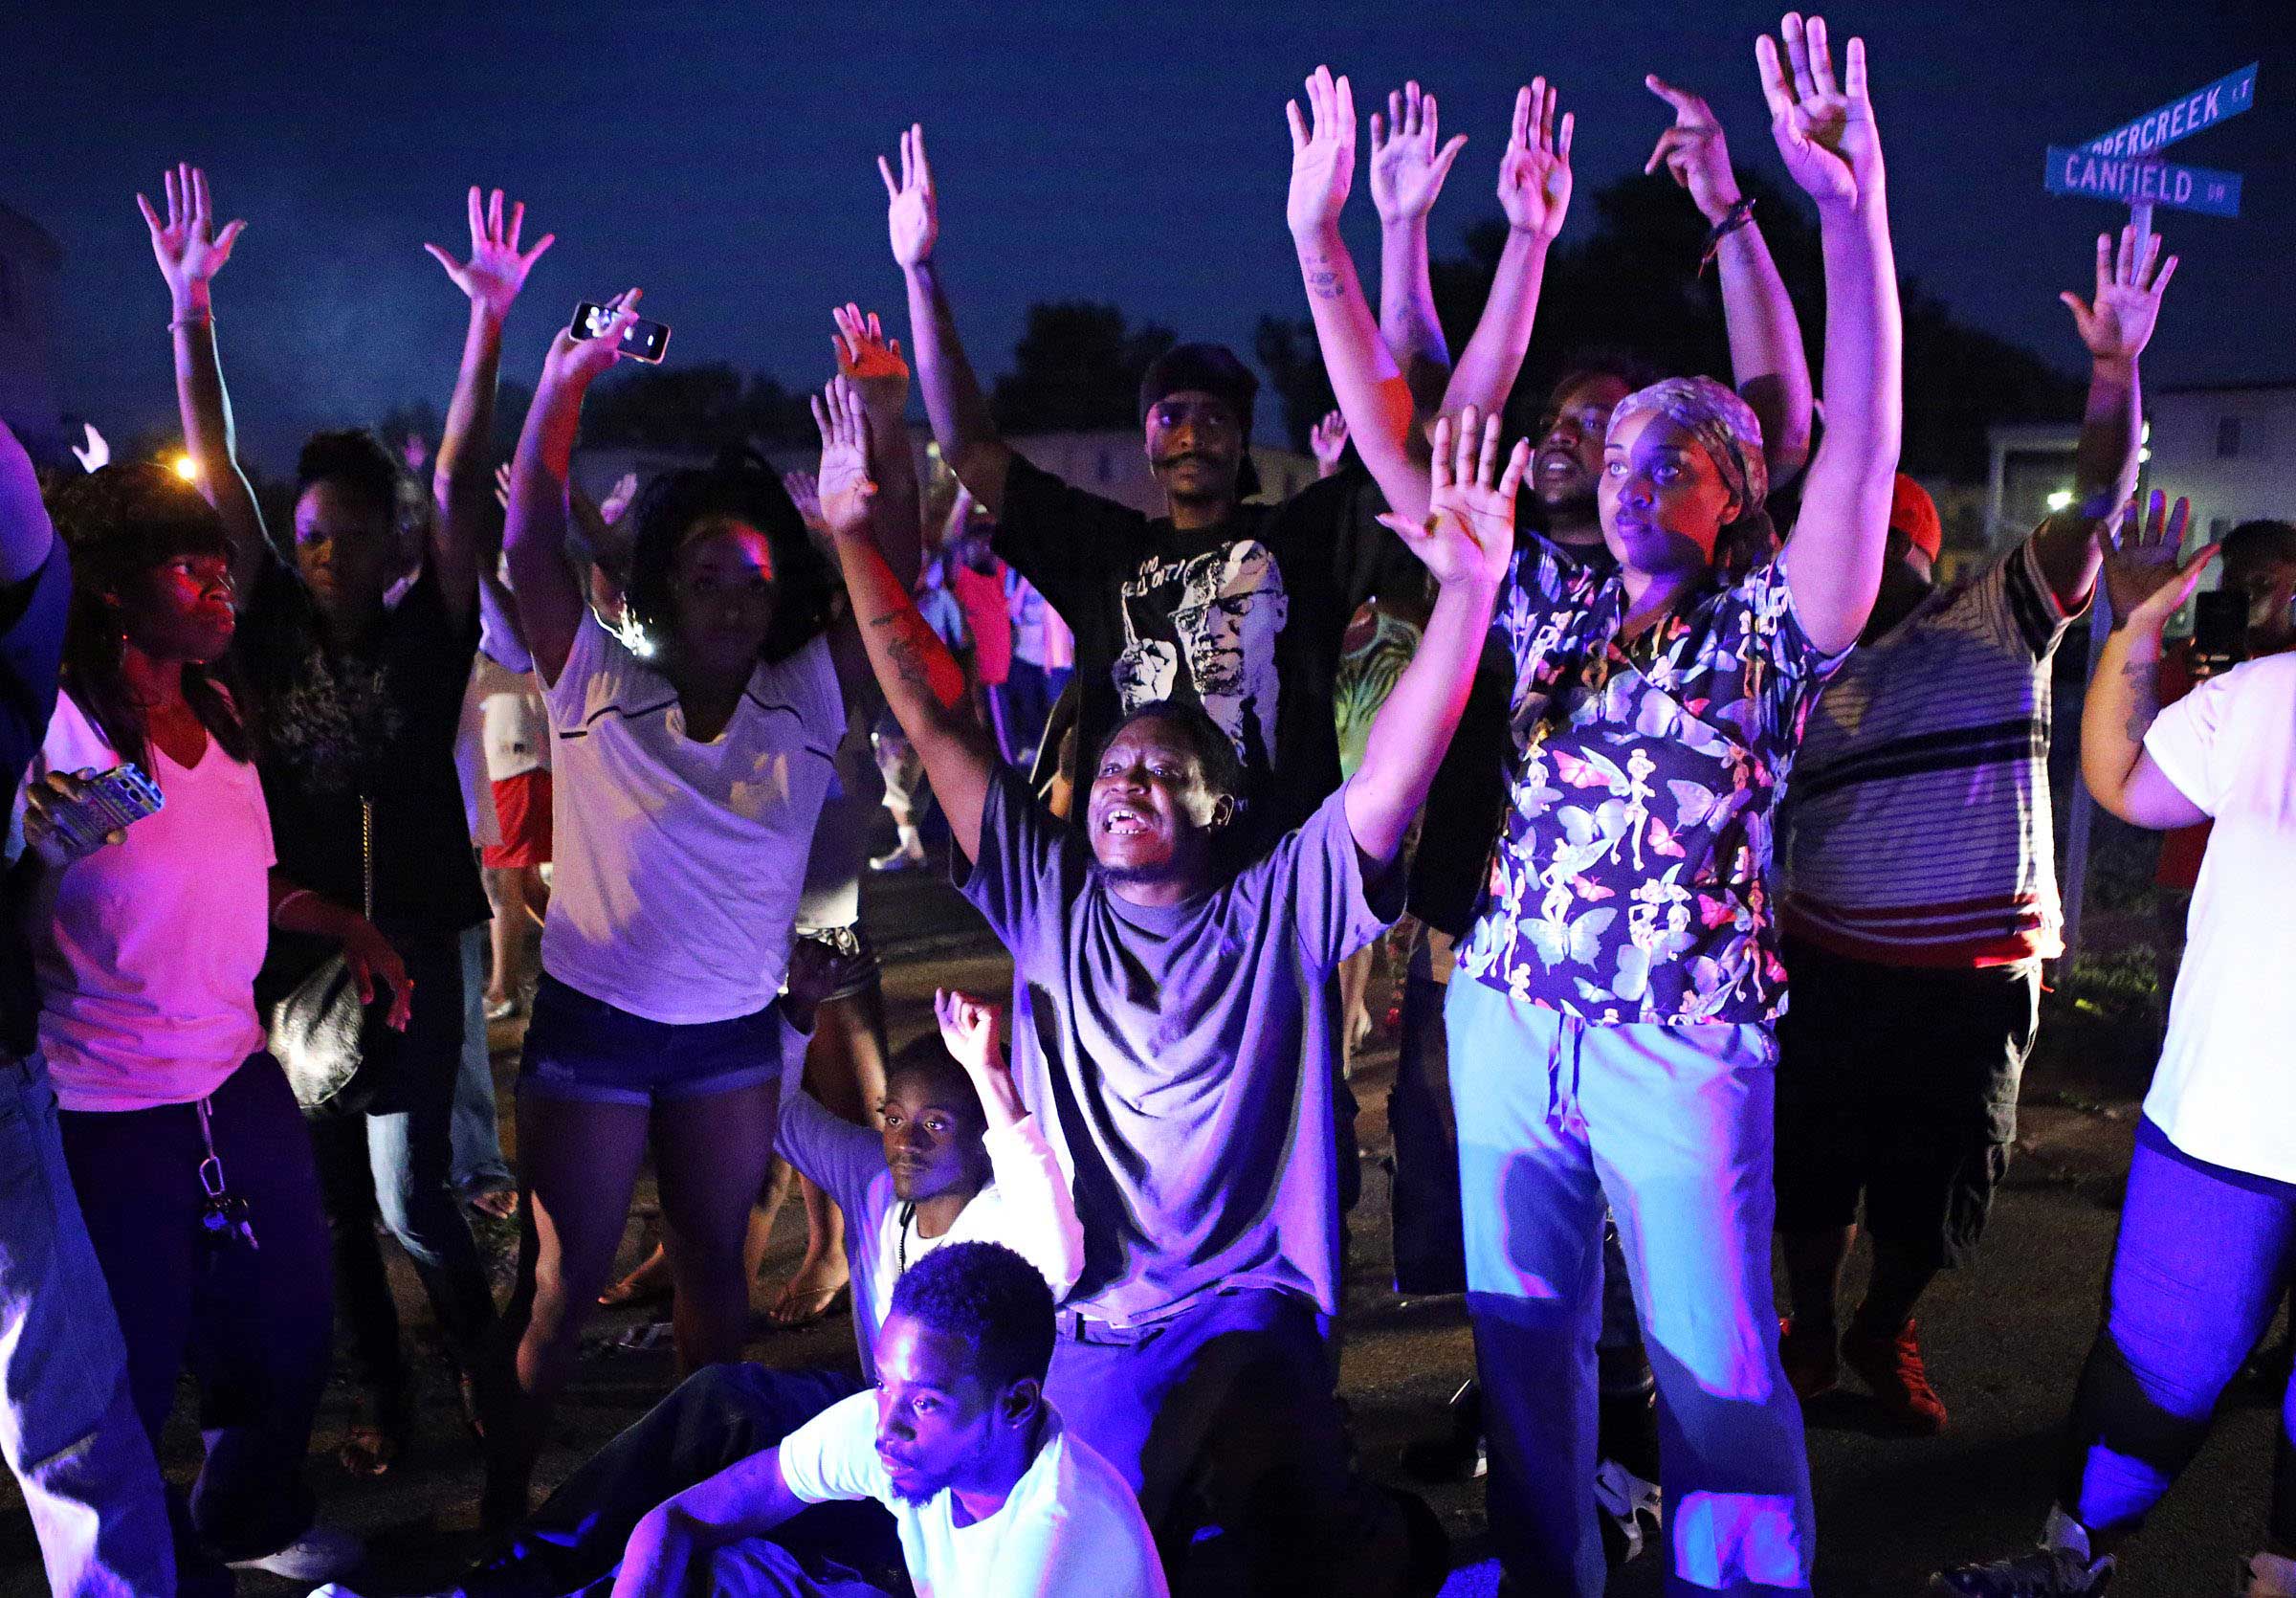 Aug. 9, 2014. A crowd gathers near the scene where 18-year-old Michael Brown was fatally shot by police in Ferguson, Mo., near St. Louis on Saturday. A spokesman with the St. Louis County Police Department confirmed a Ferguson police officer shot the man. The spokesman didnt give the reason for the shooting, nor provide the officers name or race.